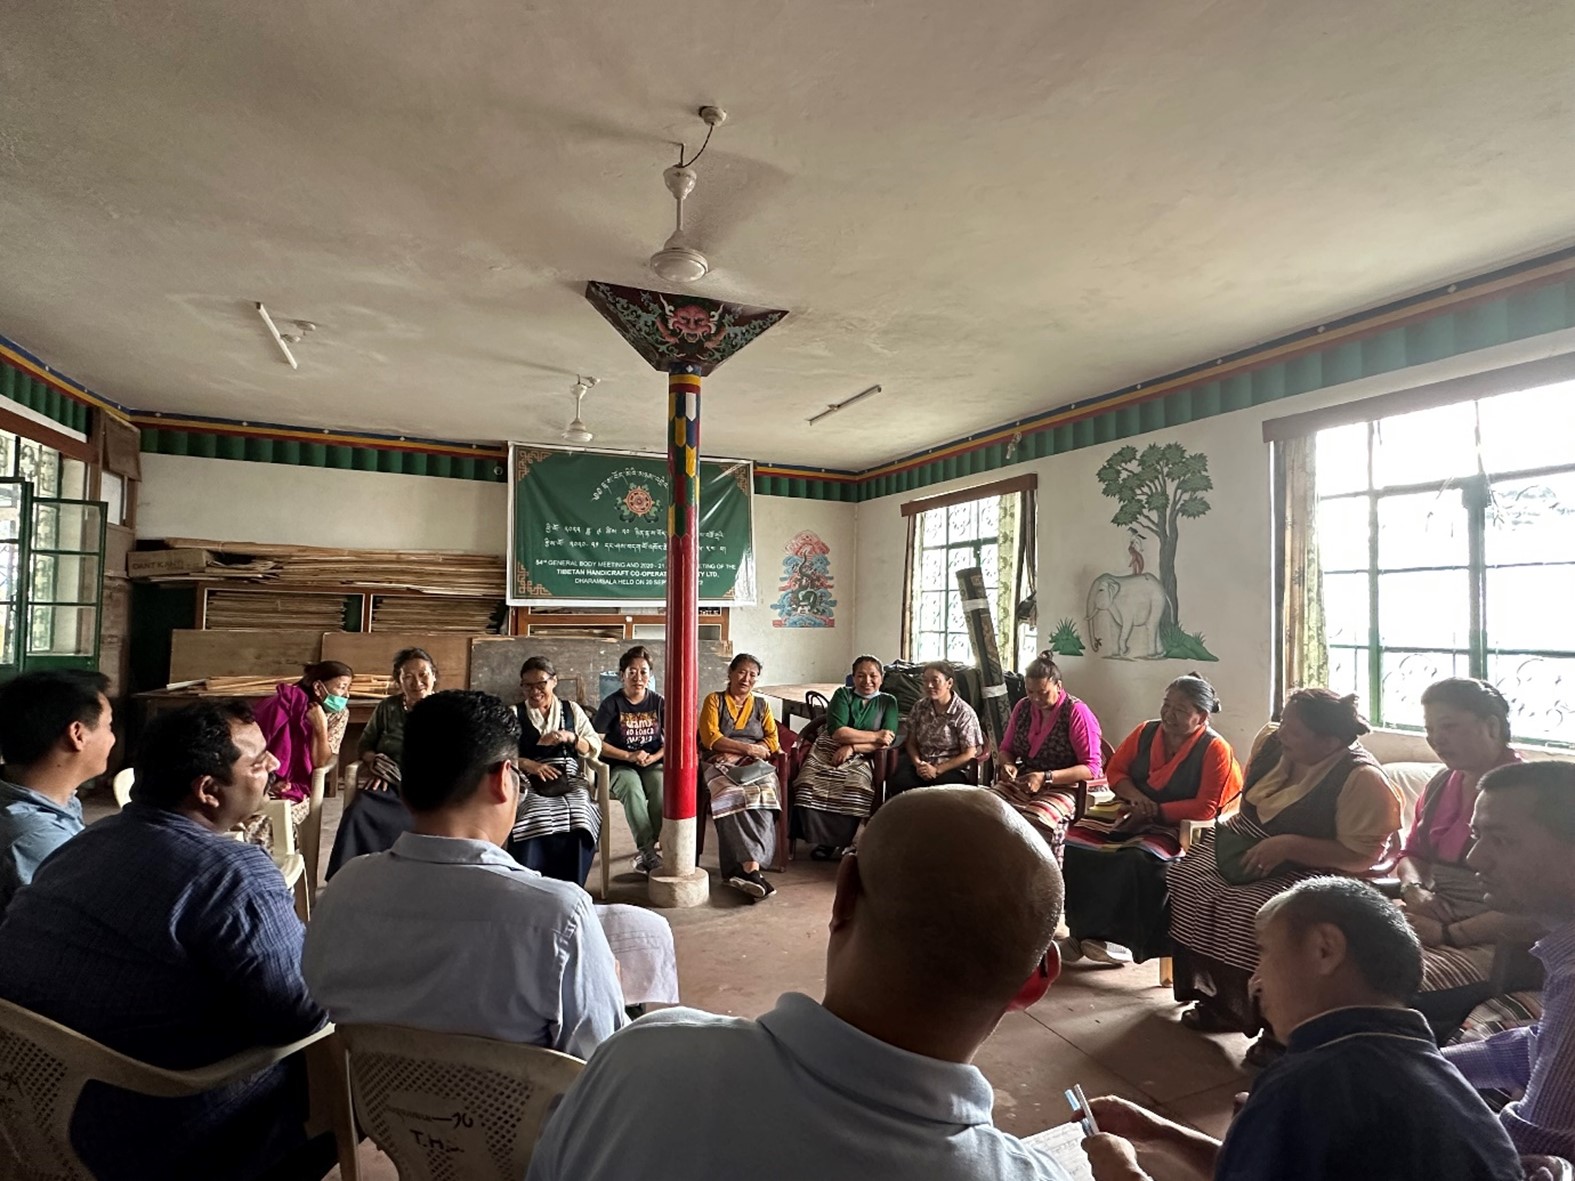 NDI/ICMA team is facilitating focus group discussion with shareholders of cooperative society, Dharamsala, Himachal Pradesh.